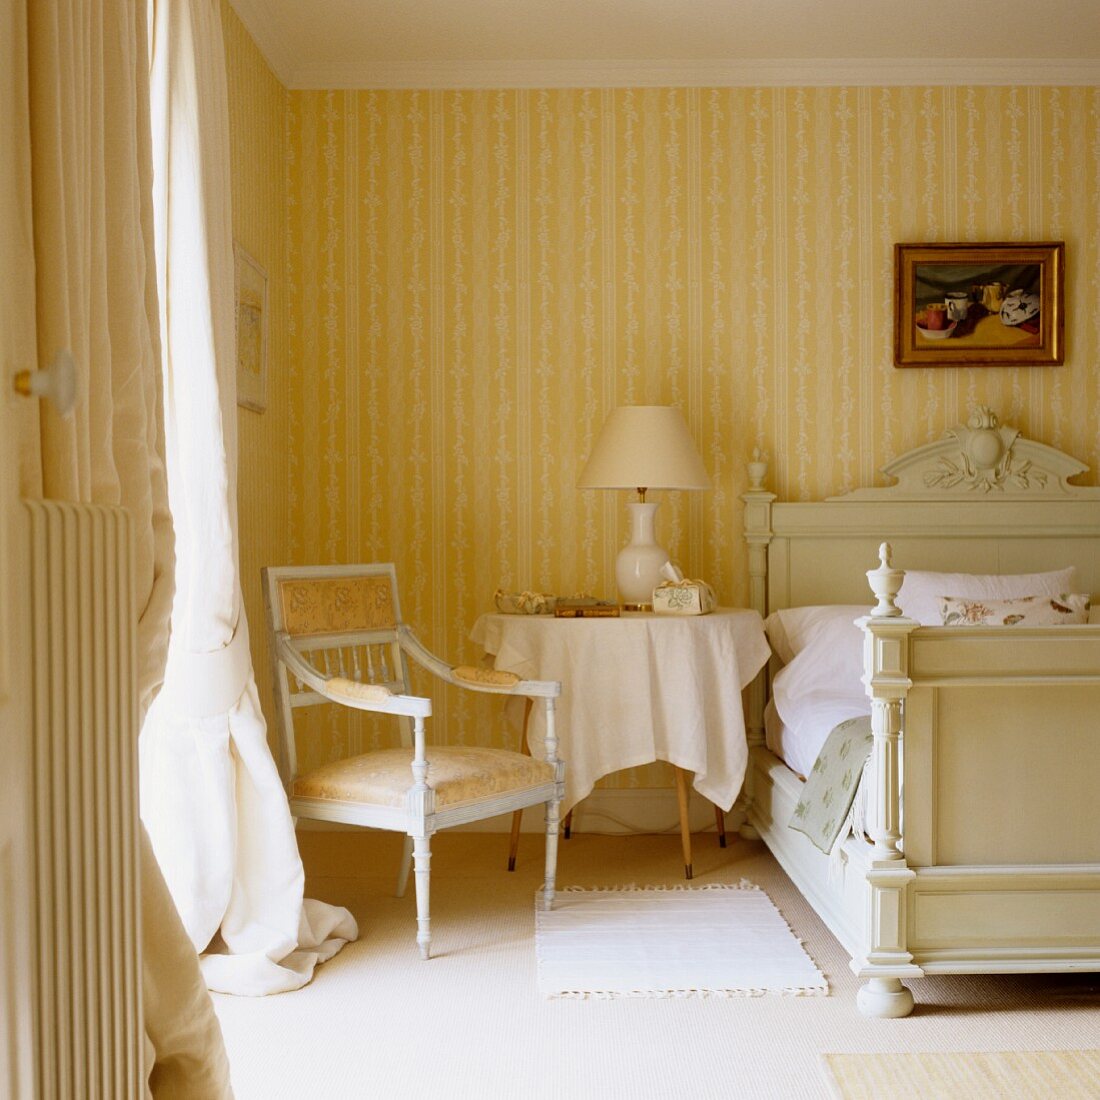 Rococo chair in corner of bedroom against yellow and white striped wallpaper